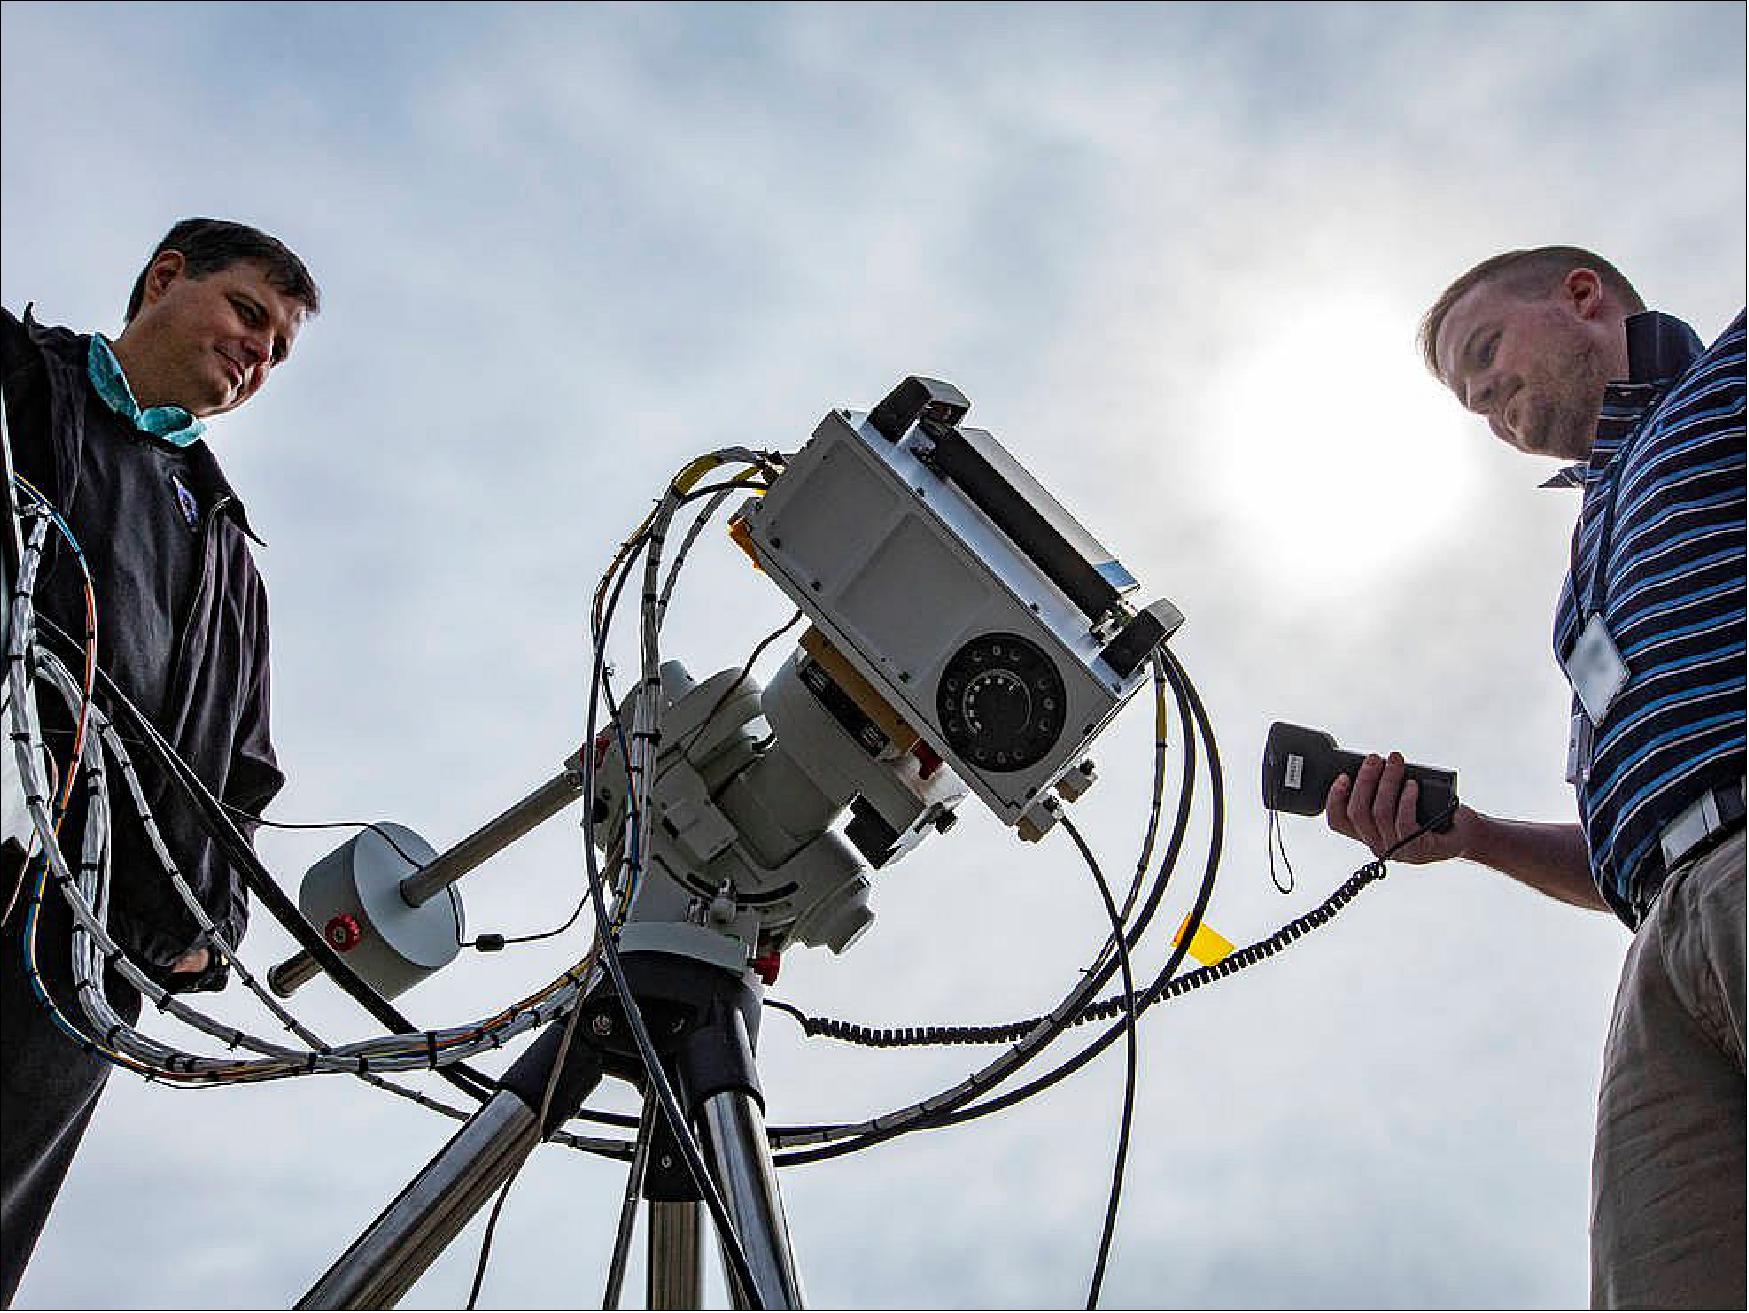 Figure 2: Charles Hill, left, and John Leckey with the Stratospheric Aerosol and Gas Experiment (SAGE) IV Pathfinder instrument during Sun-look testing at NASA's Langley Research Center (image credits: NASA/David C. Bowman)